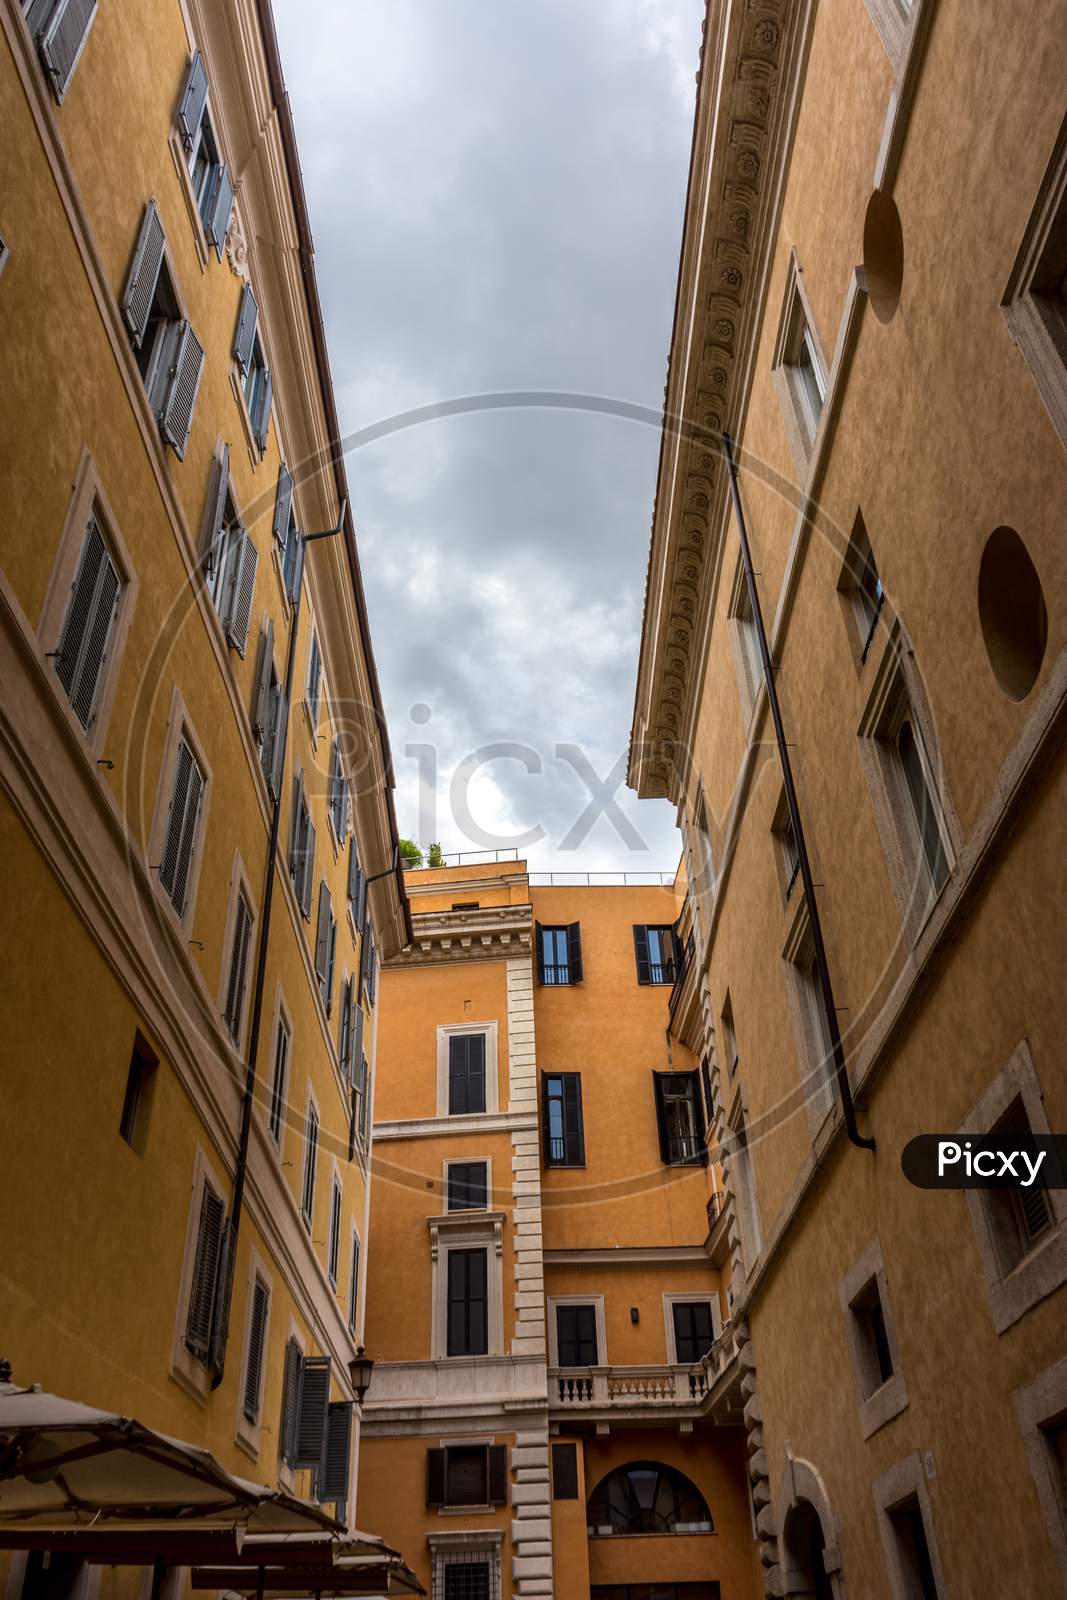 Rome, Italy - 23 June 2018: A Narrow City Street With Buildings On The Side Of A Building In Rome, Italy